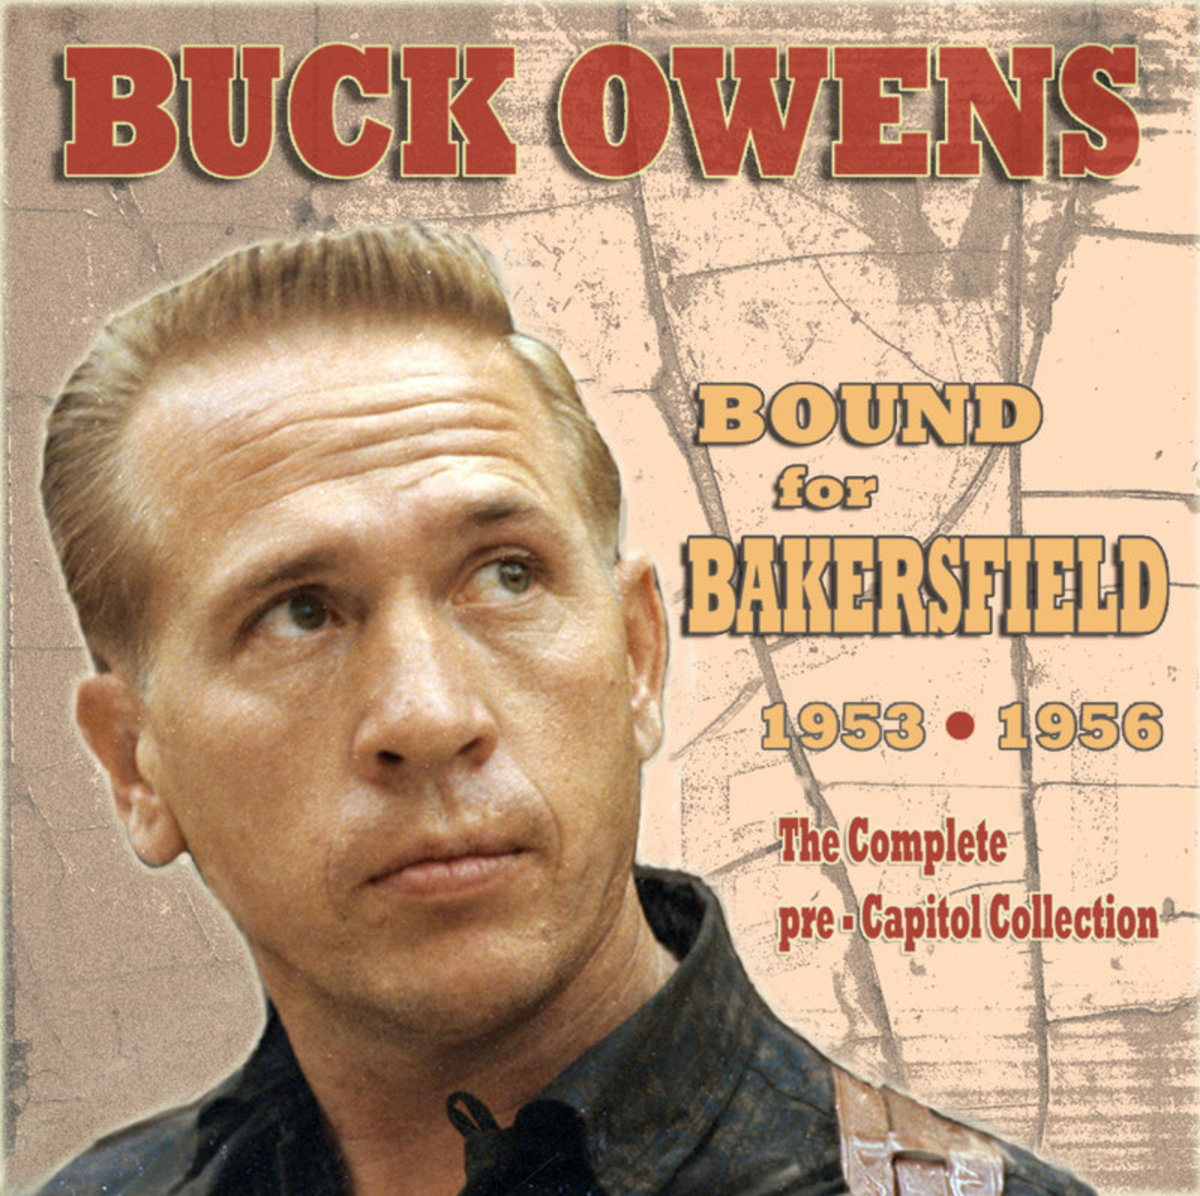 Buck Owens has roots here